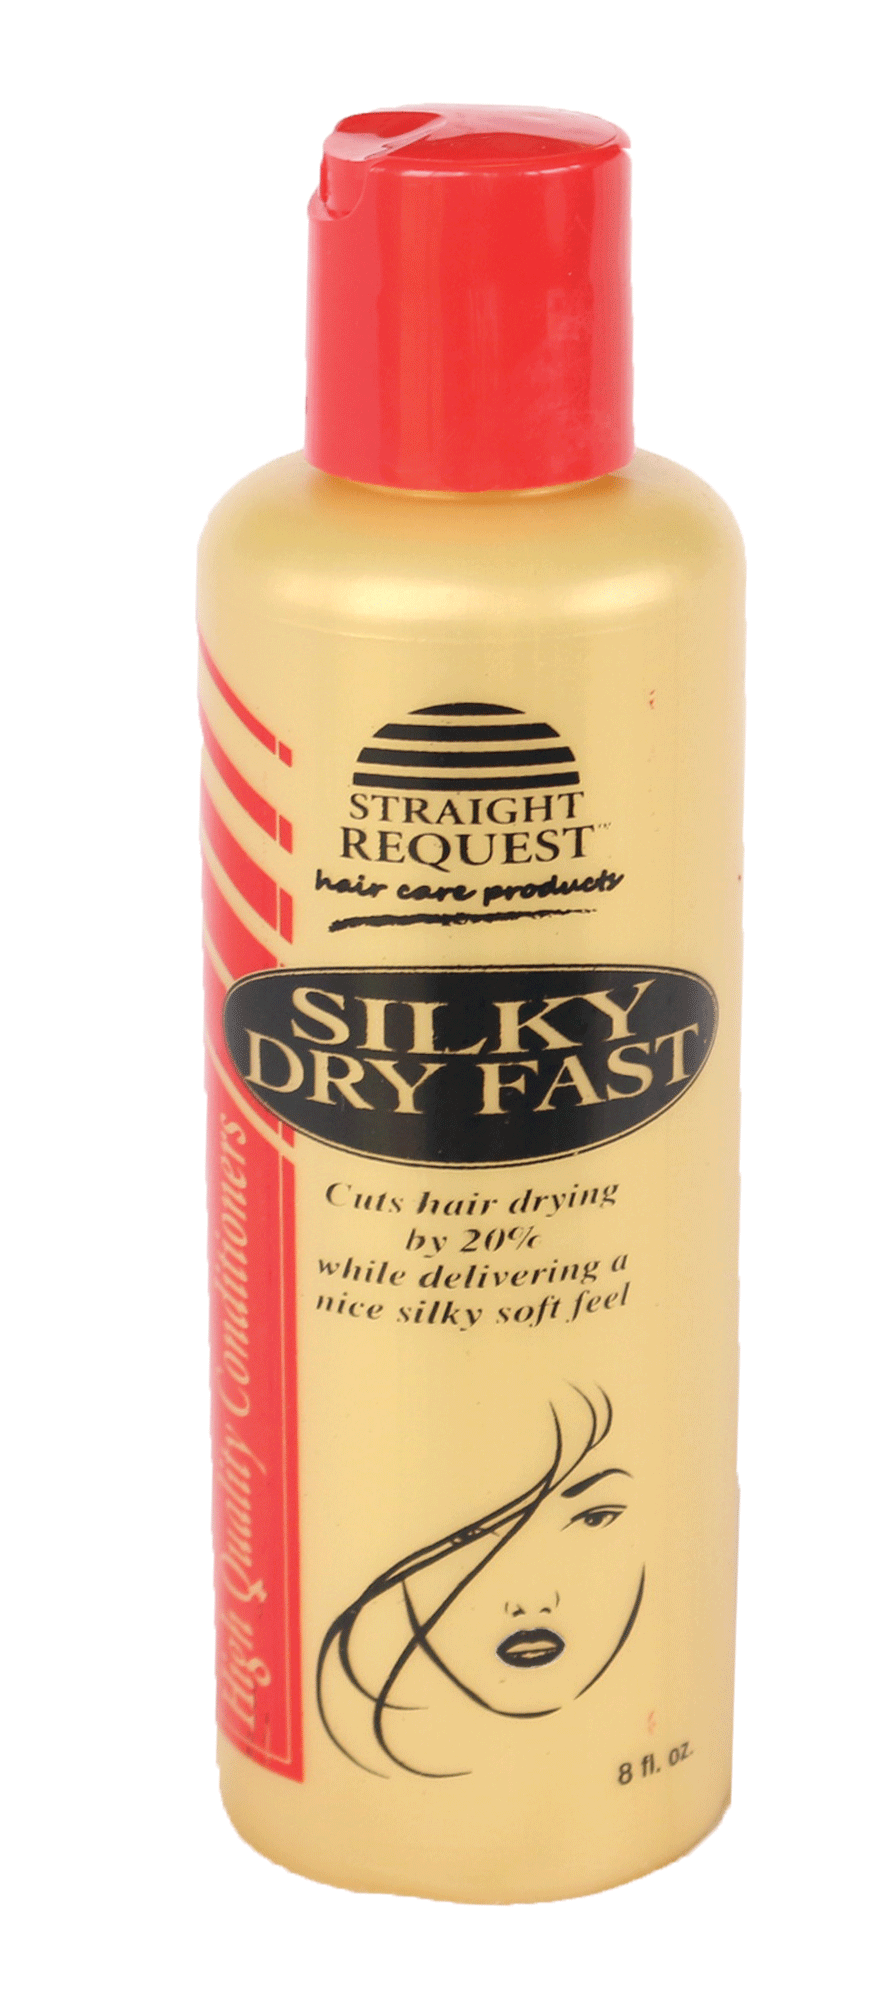 Silky Dry Fast Leave-In Conditioner - 8oz